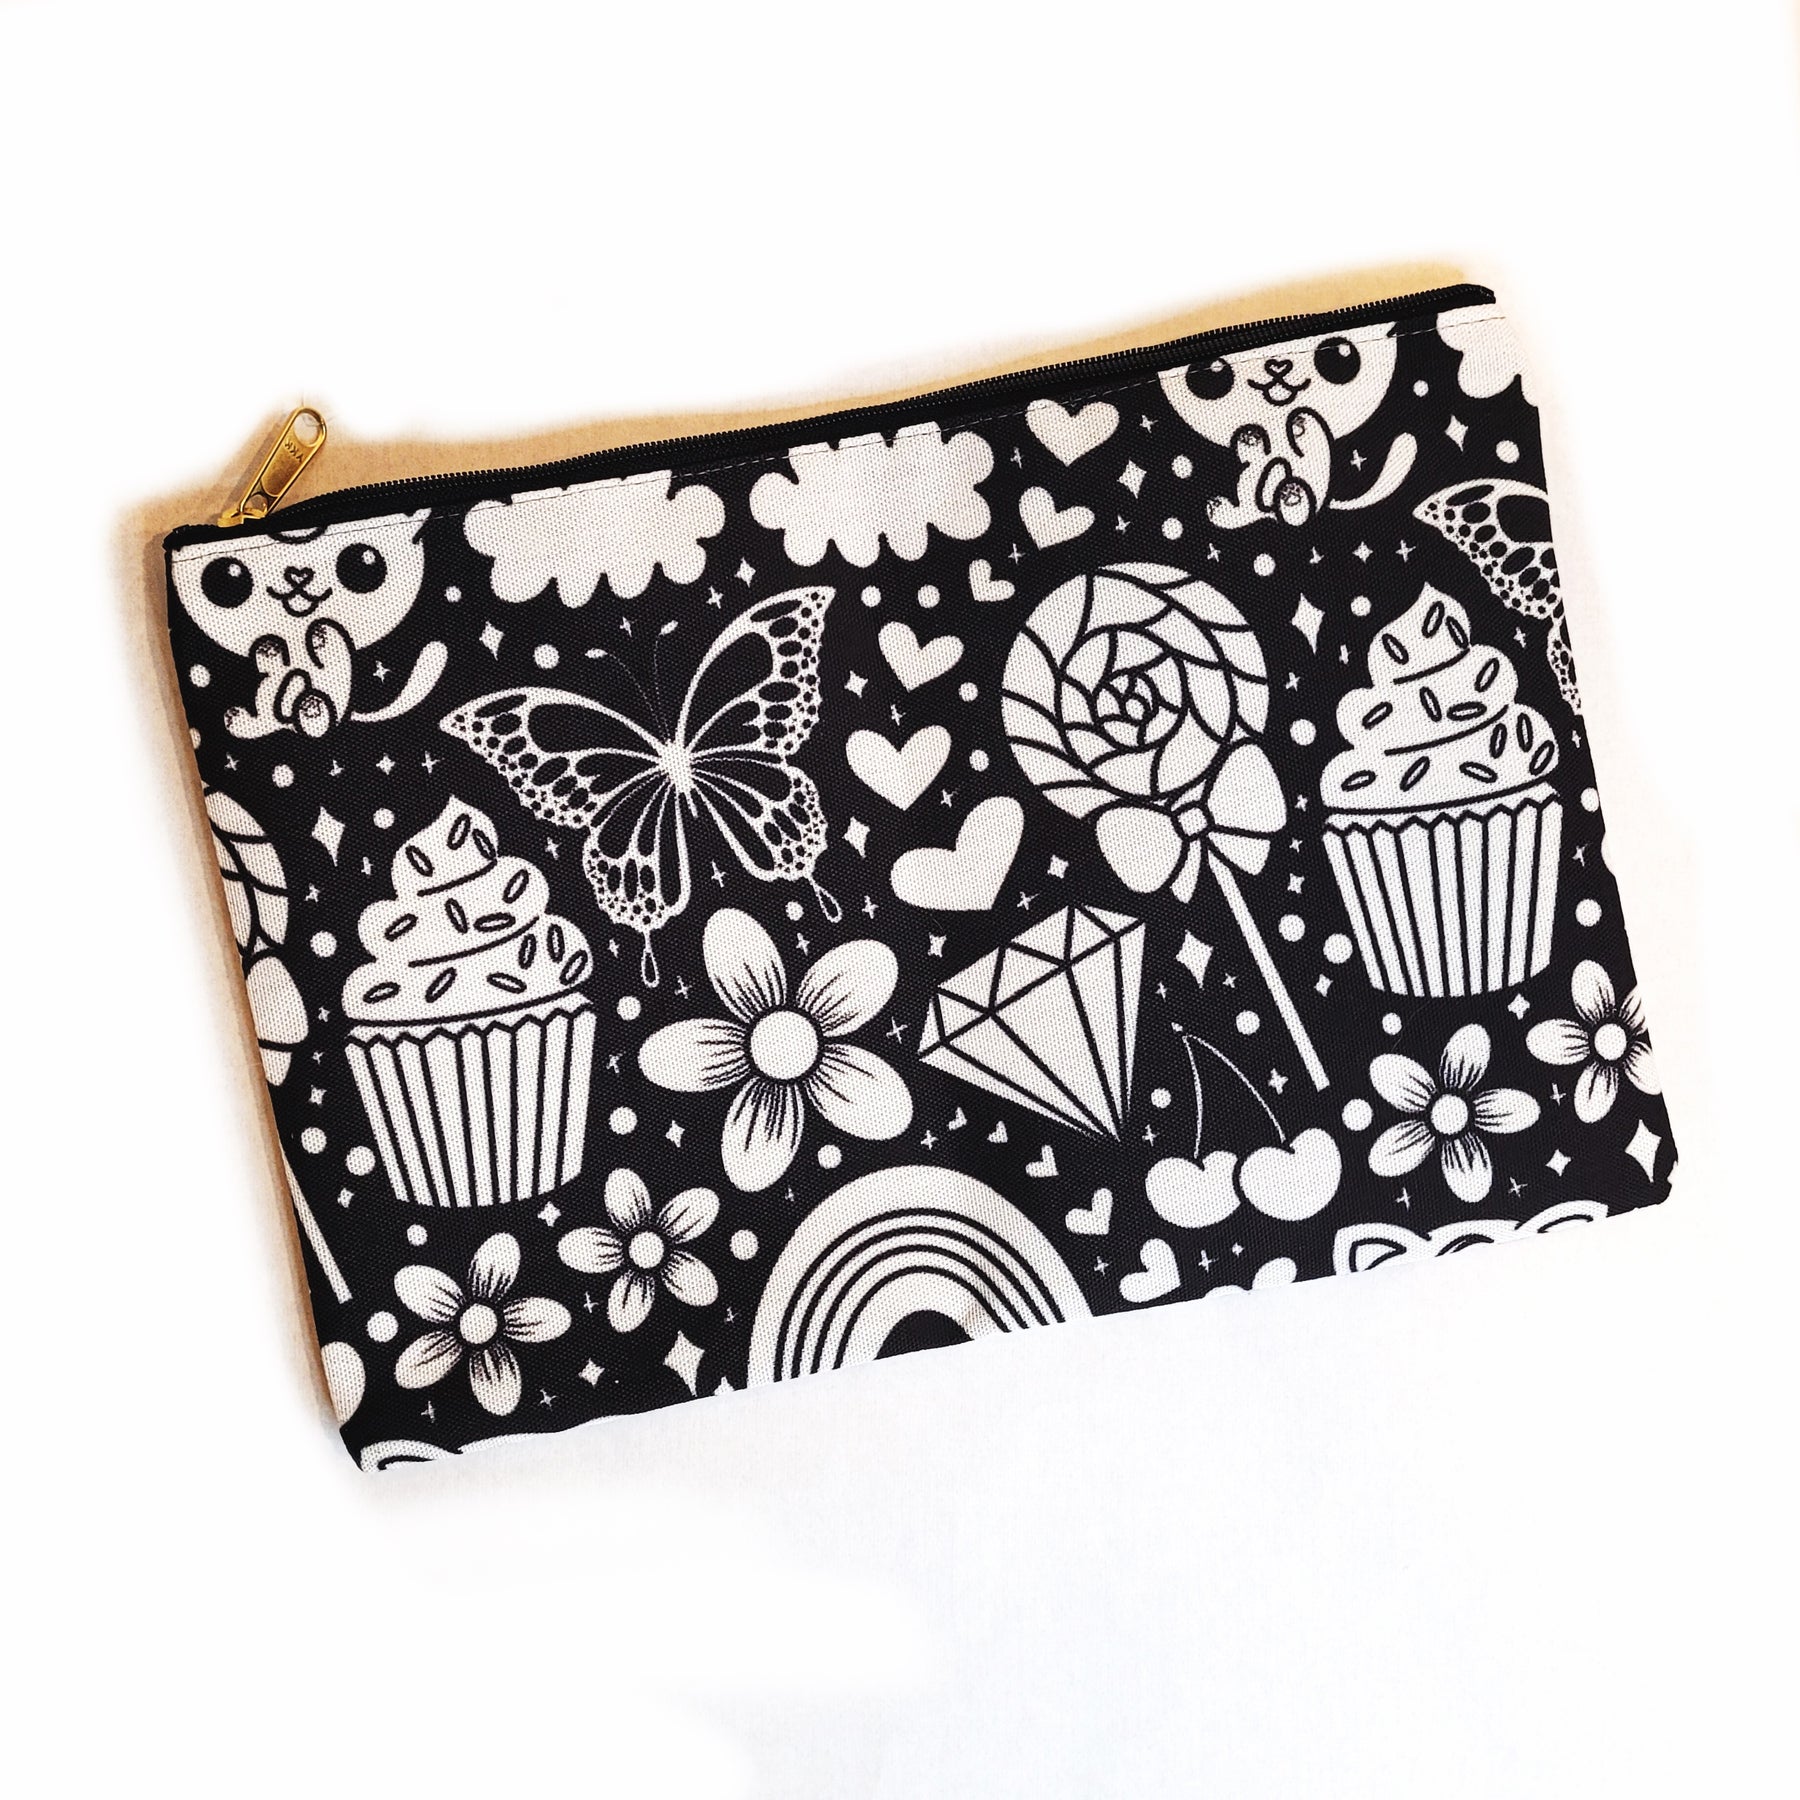 Doodle Me small Pencil Bag with Zip